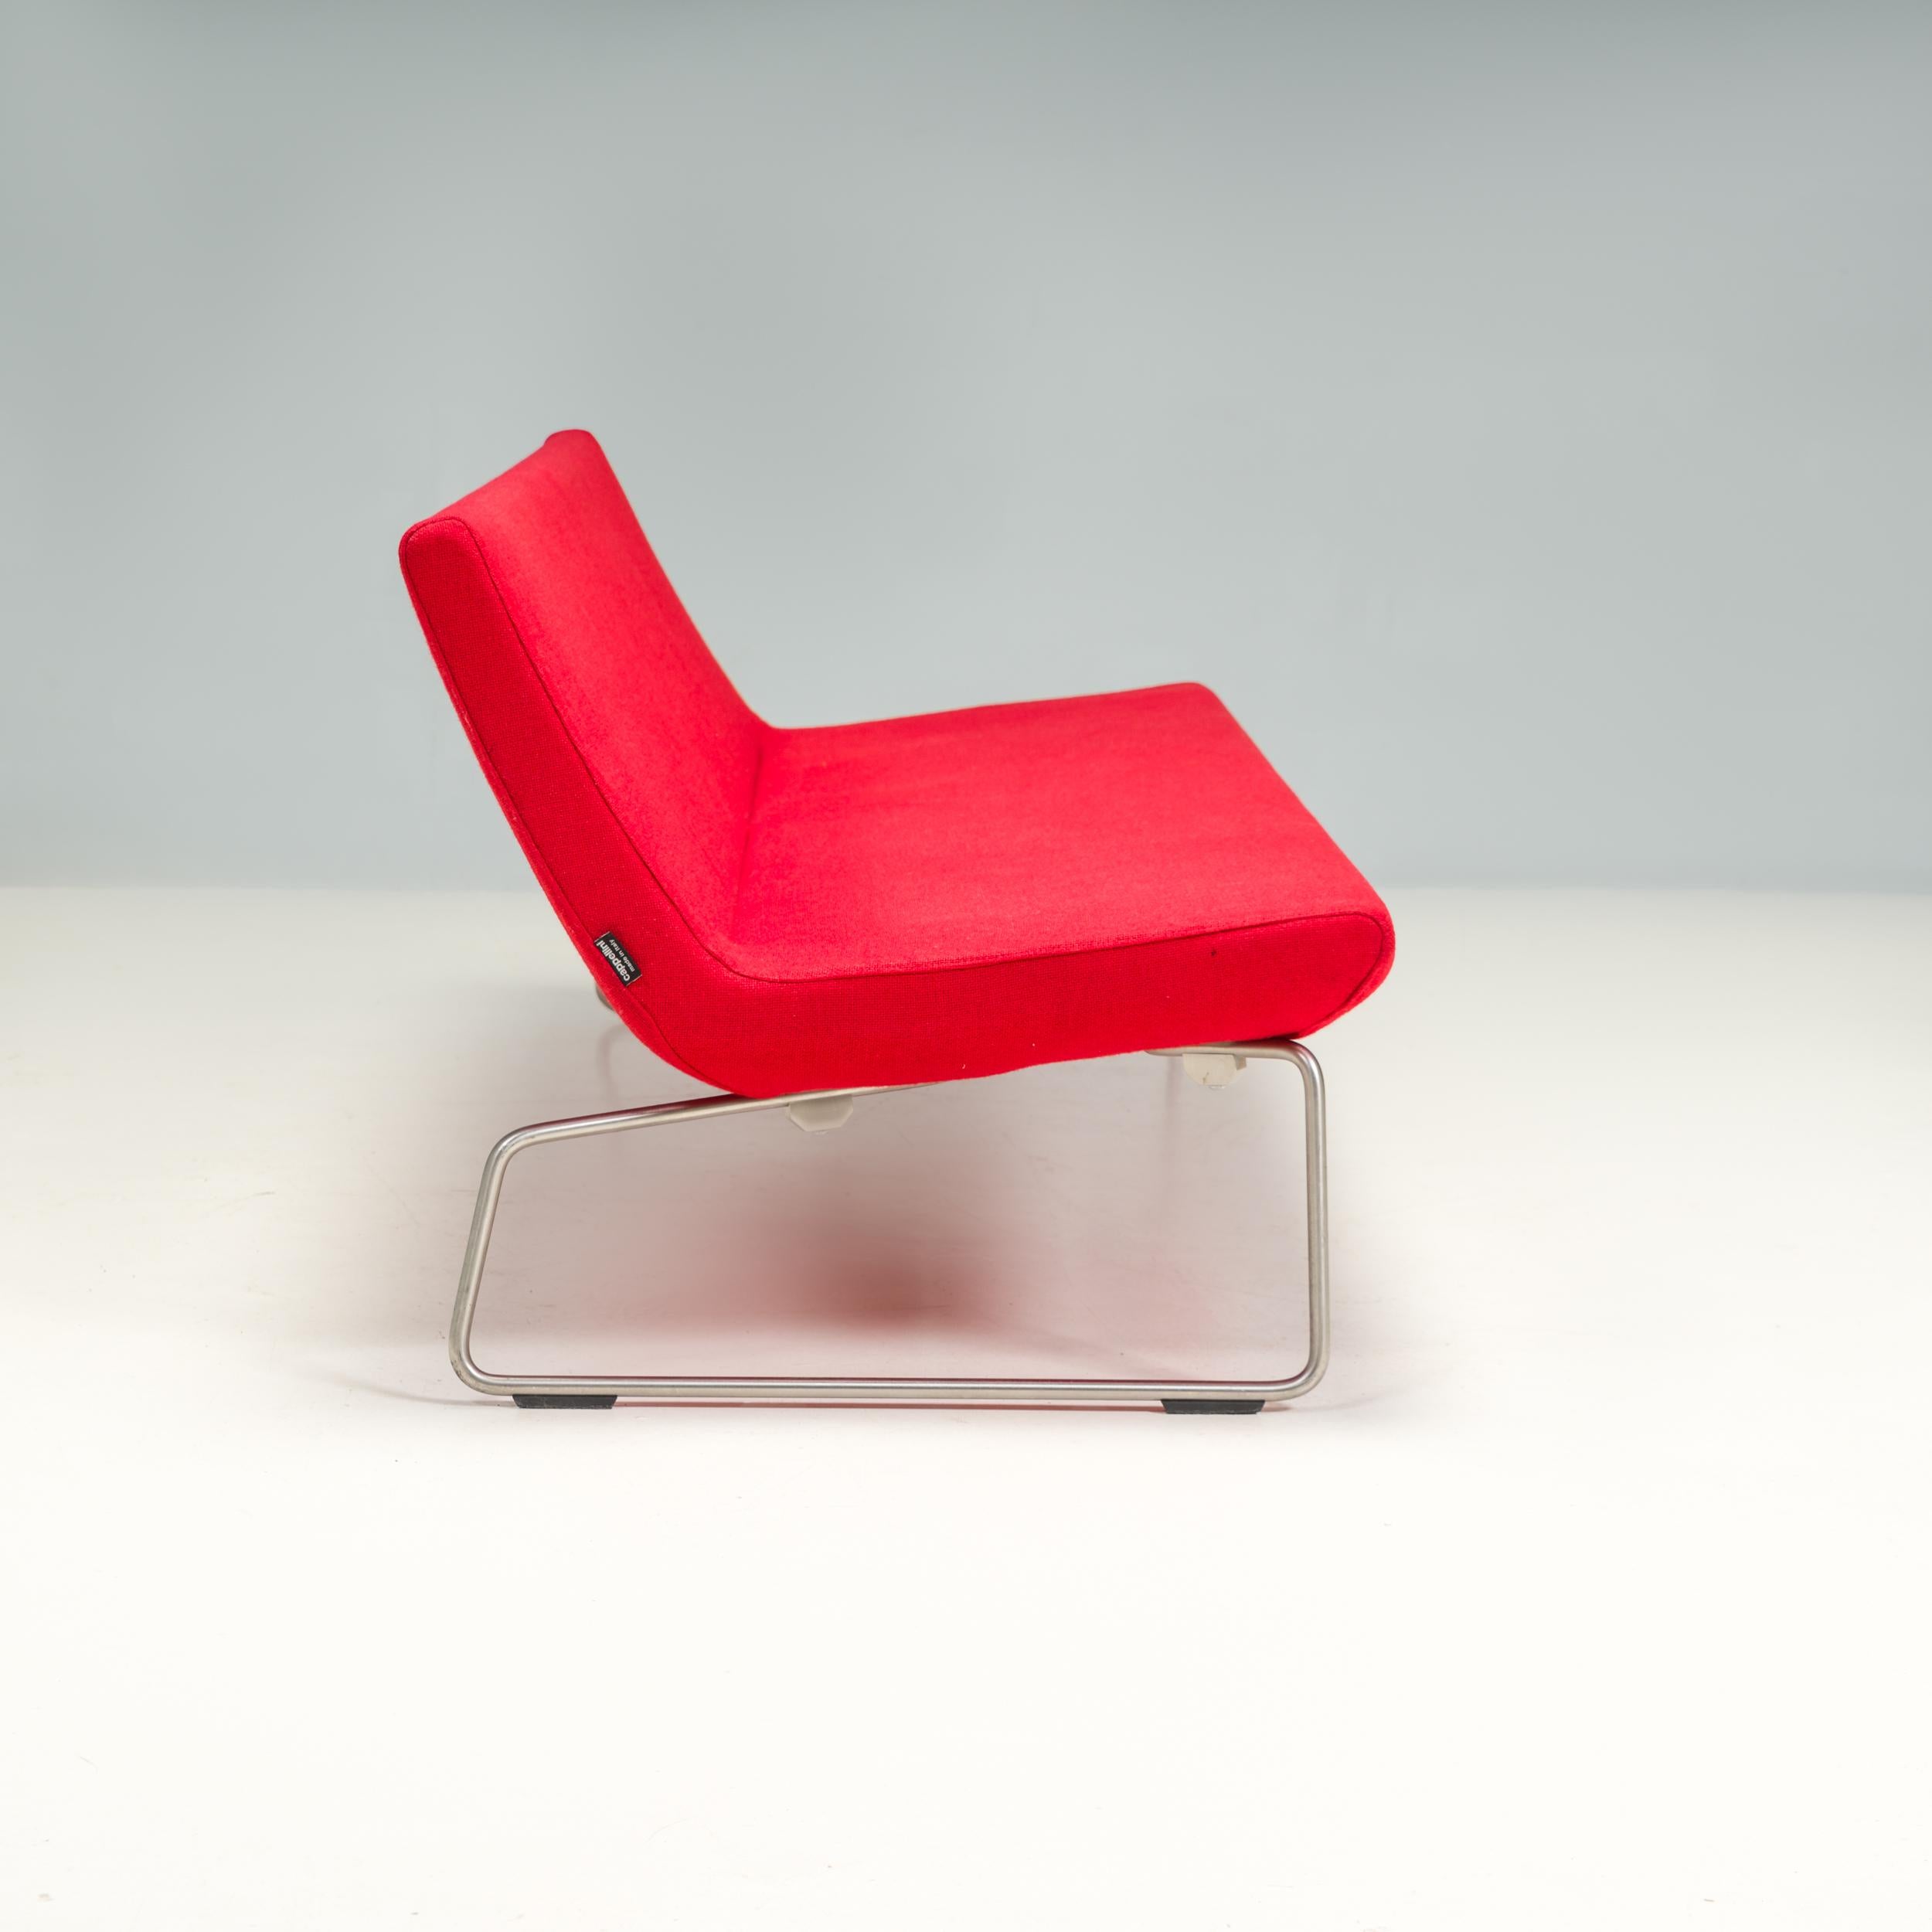 Barber & Osgerby for Cappellini Red Superlight 530 Sofa In Fair Condition For Sale In London, GB